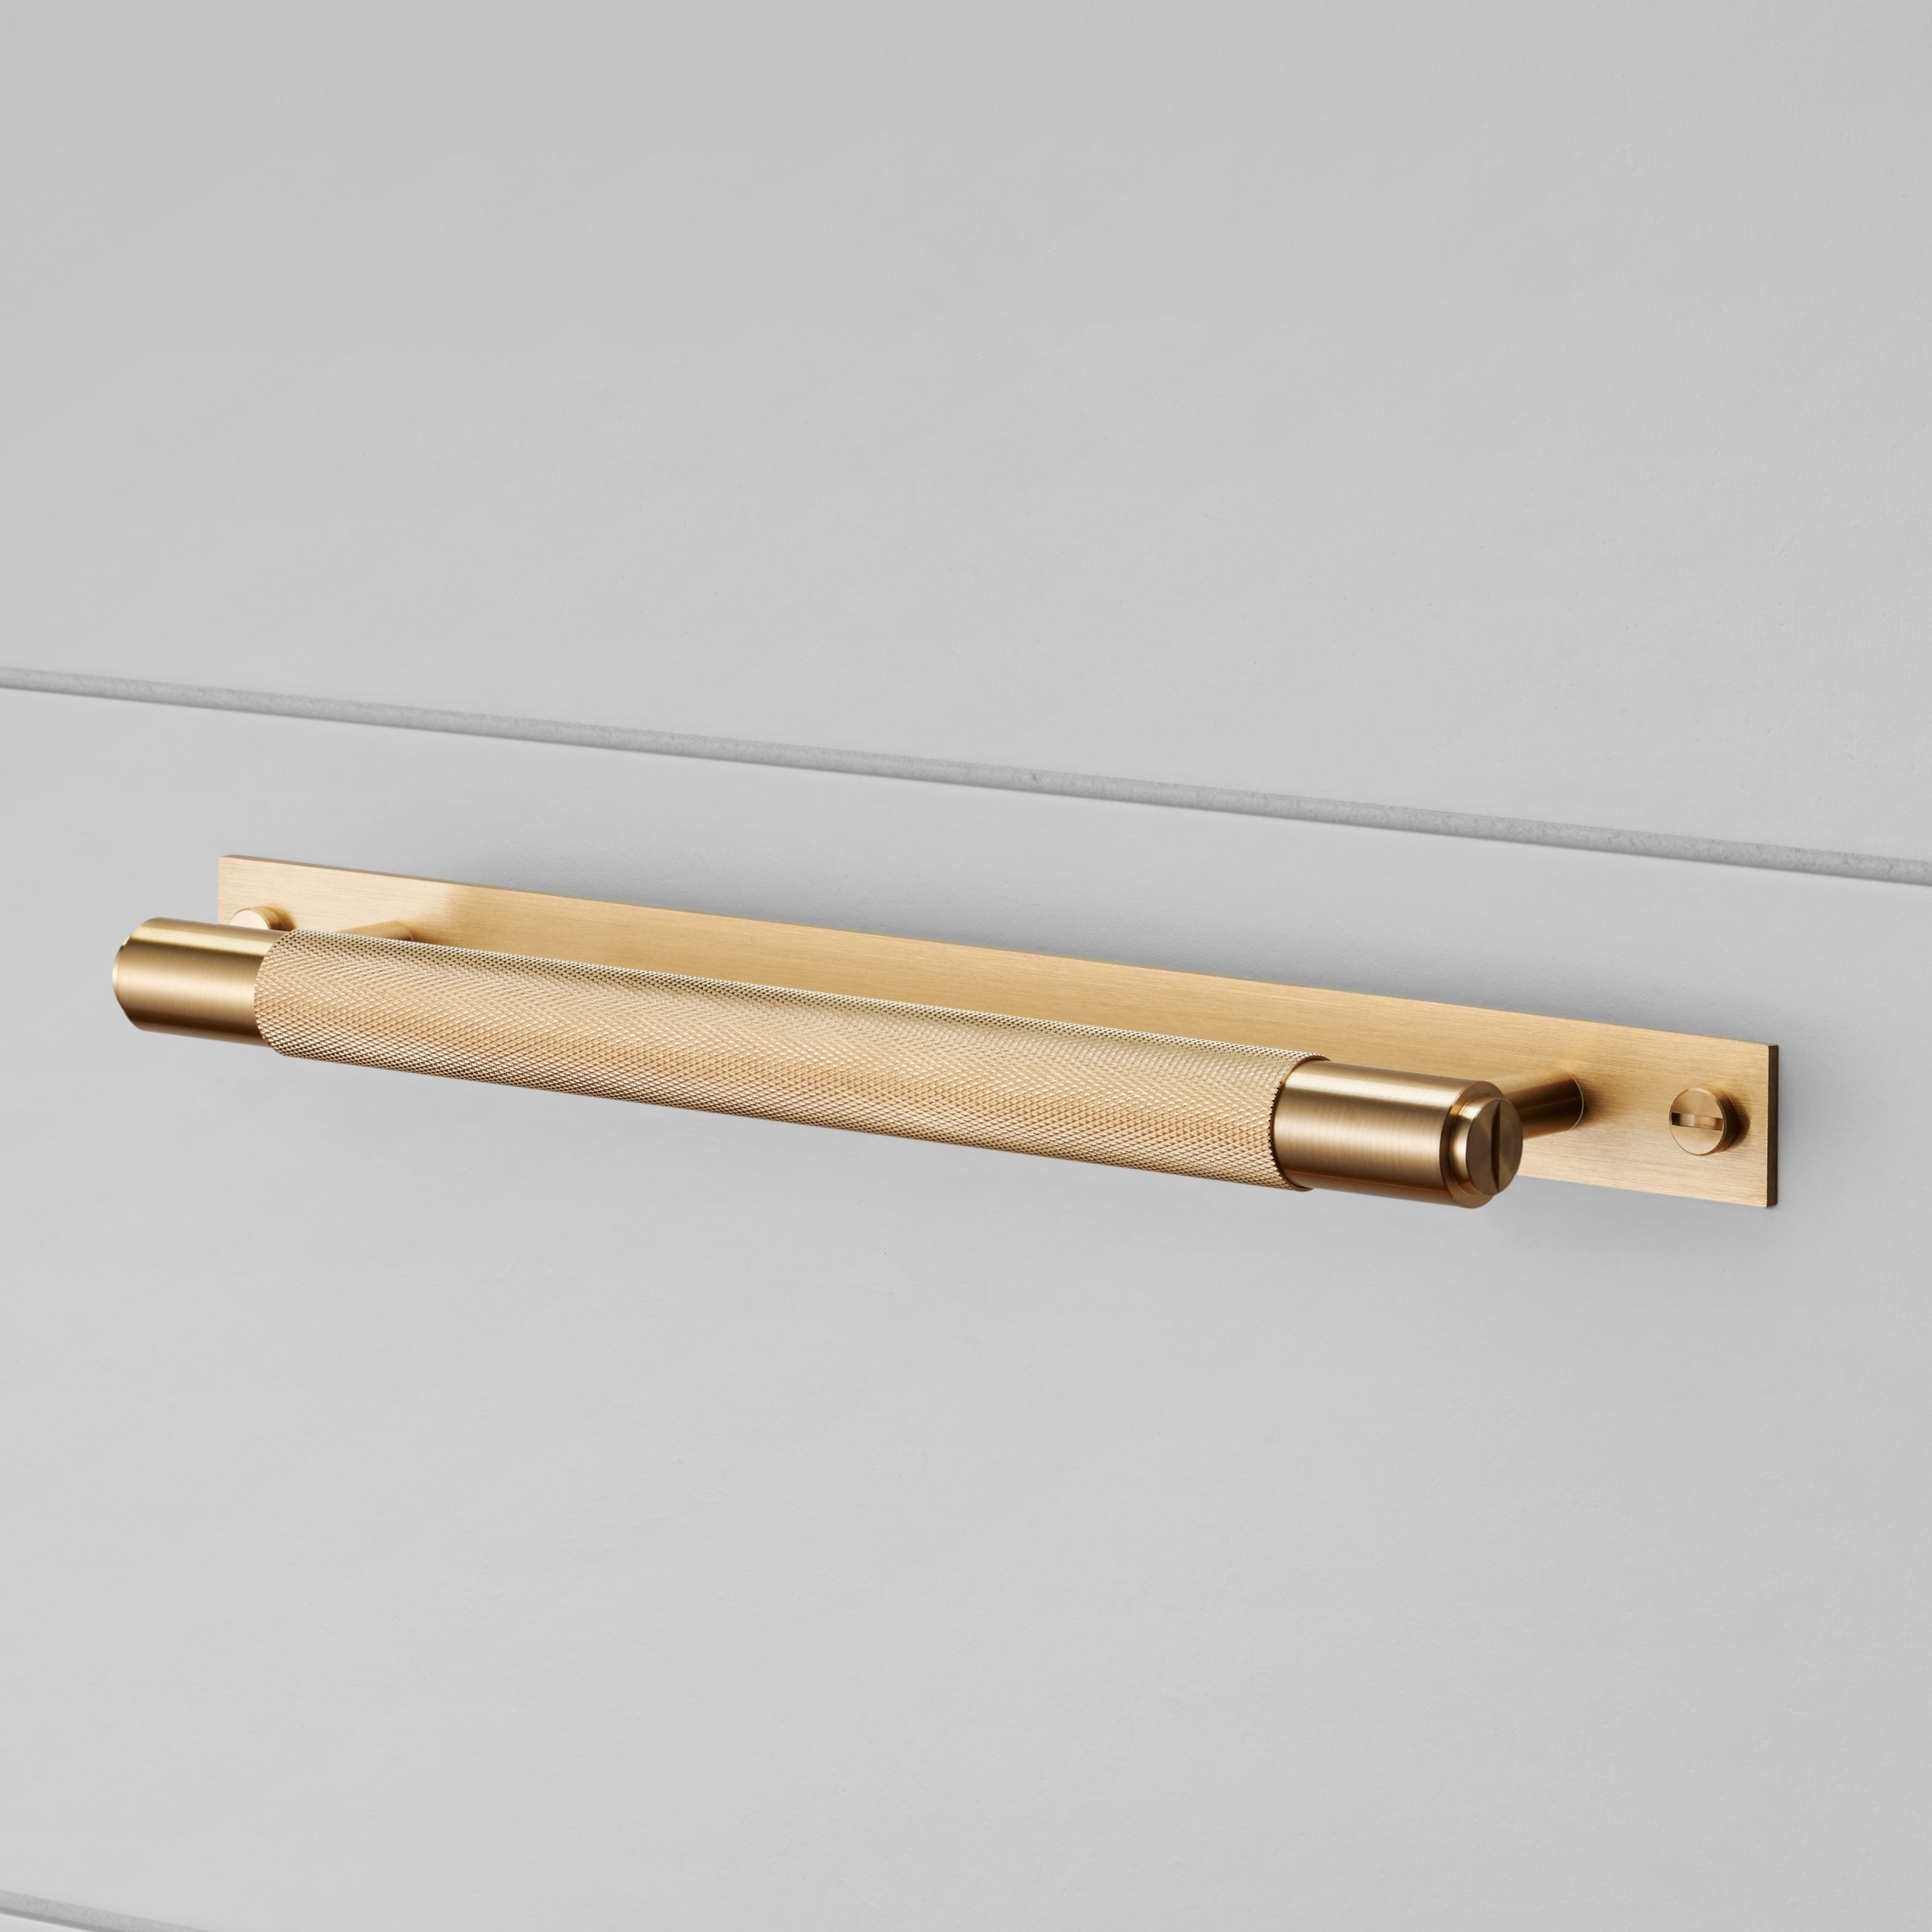 Buster + Punch Pull Bar, Linear Design